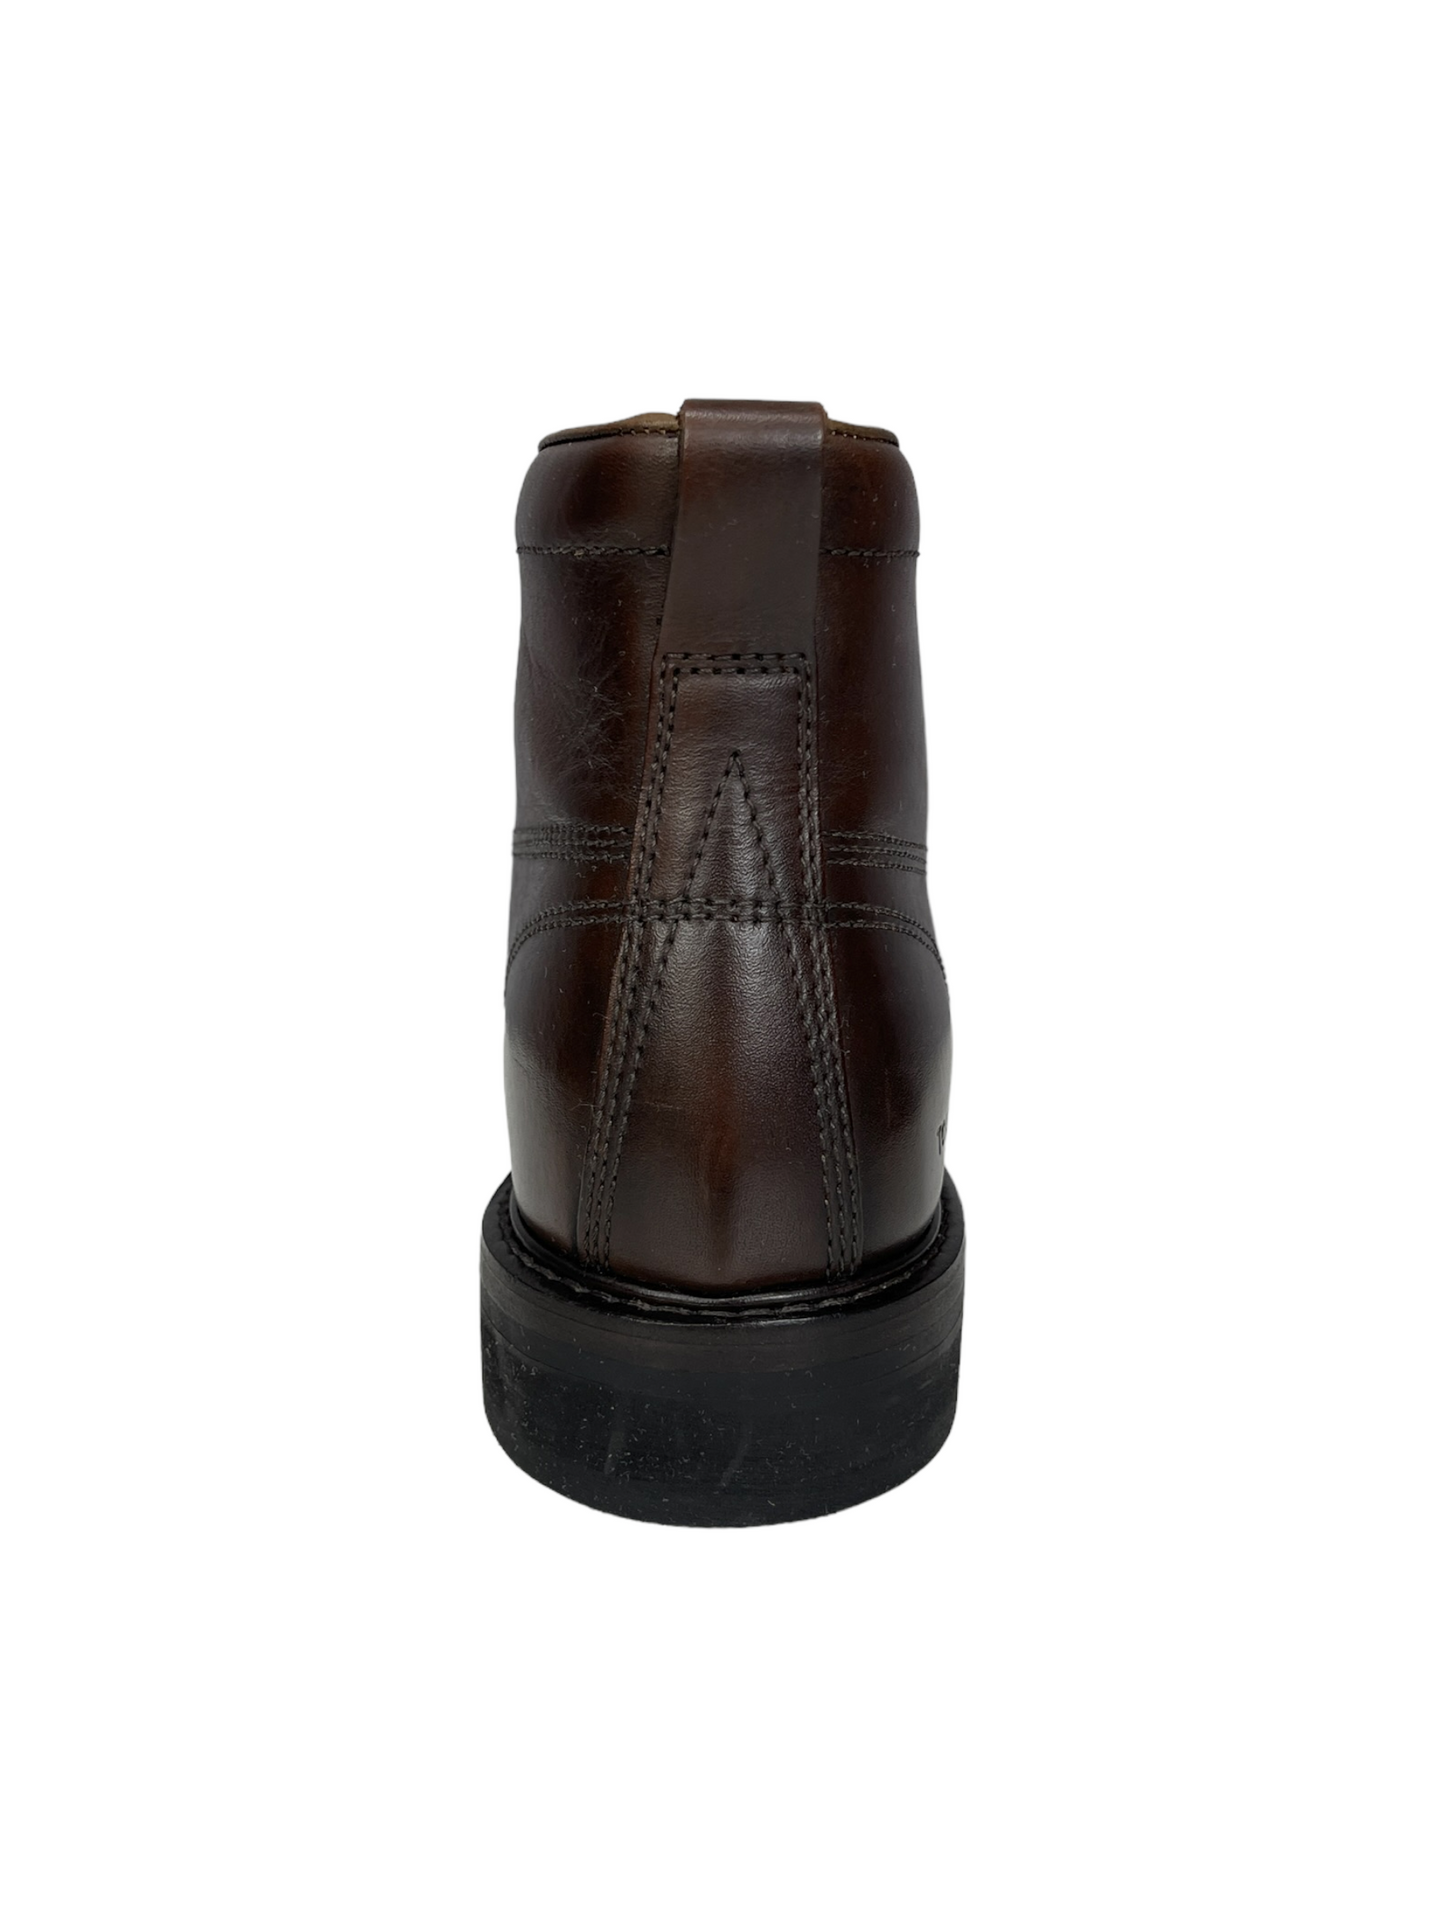 Tom Ford Brown Leather Work Boot 8 - Genuine Design Luxury Consignment Calgary, Alberta, Canada New and Pre-Owned Clothing, Shoes, Accessories.